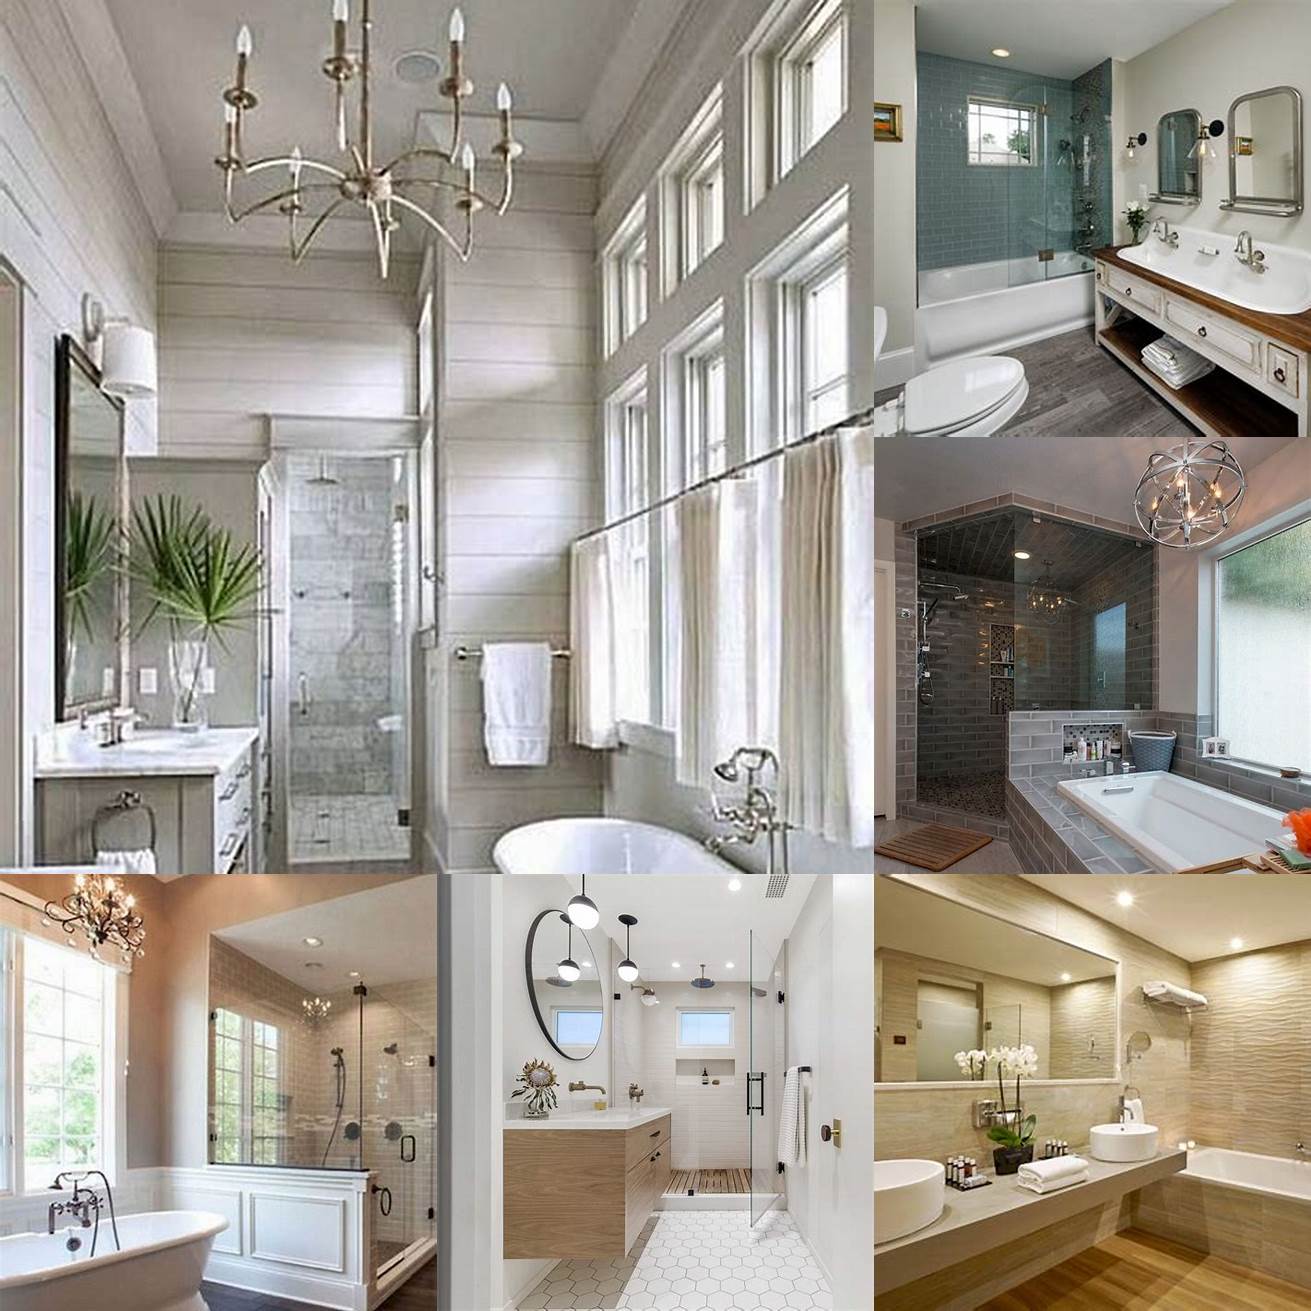 Images of different bathroom styles